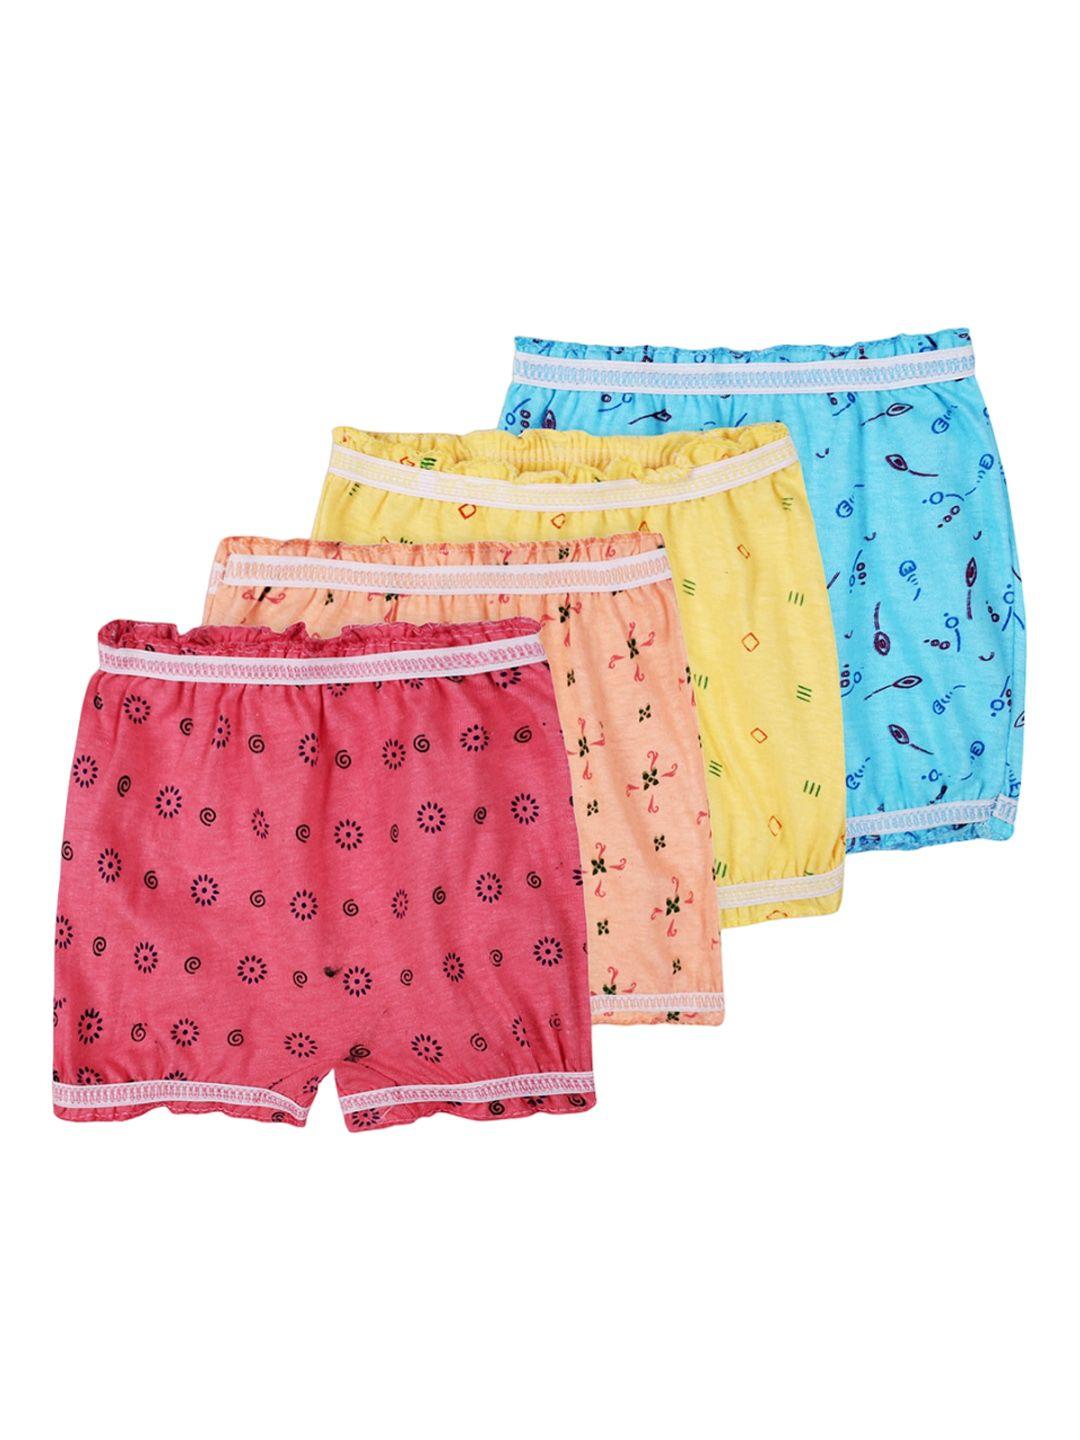 baesd kids pack of 4 printed pure cotton boyshorts briefs